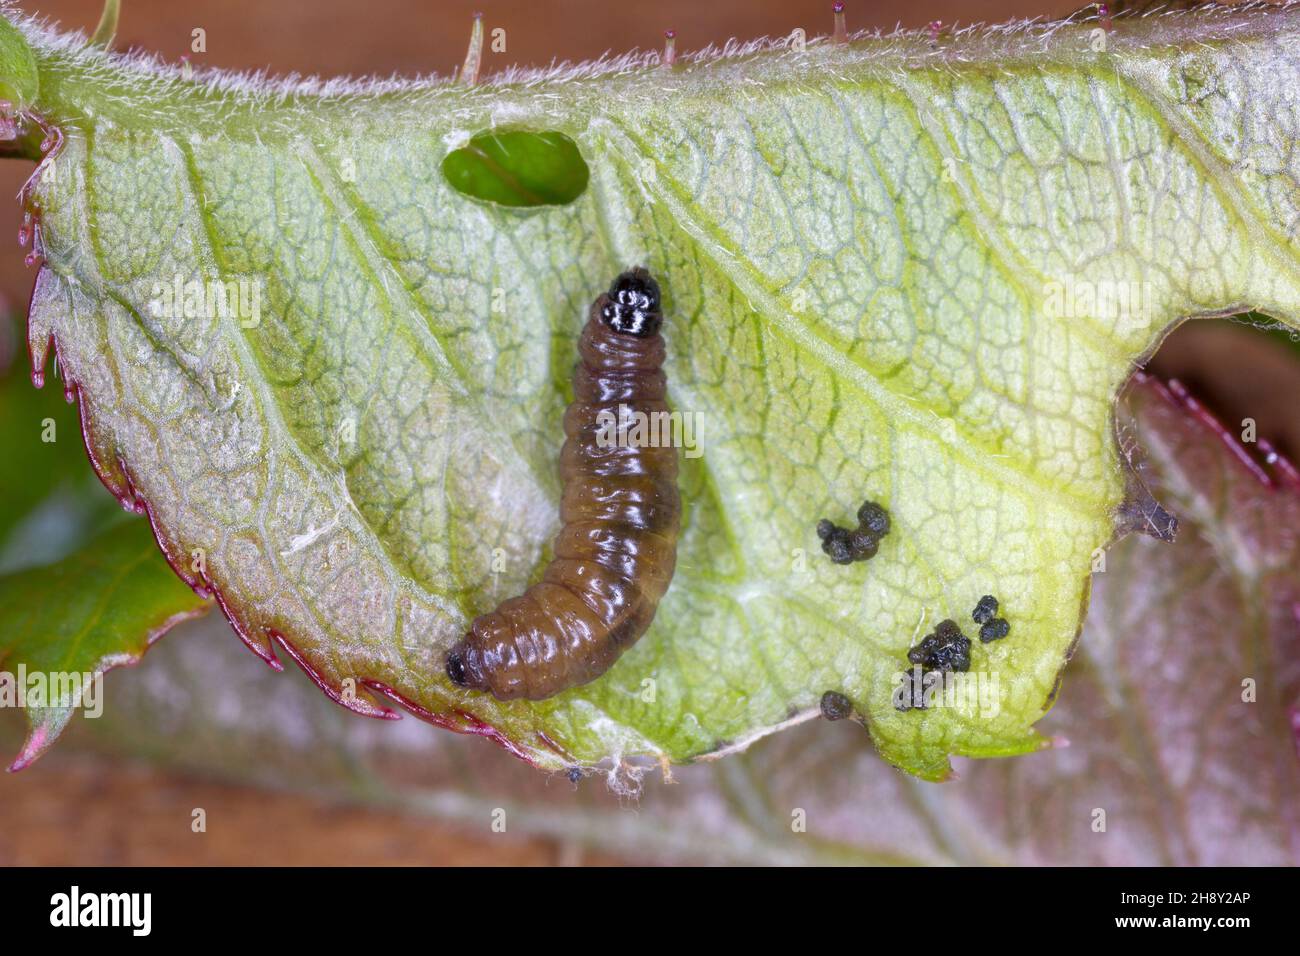 Caterpillar of Archips rosana (Cacoecia) the rose tortrix Tortricidae on damaged rose leaf. The larvae feed within rolled leaves of various plants Stock Photo